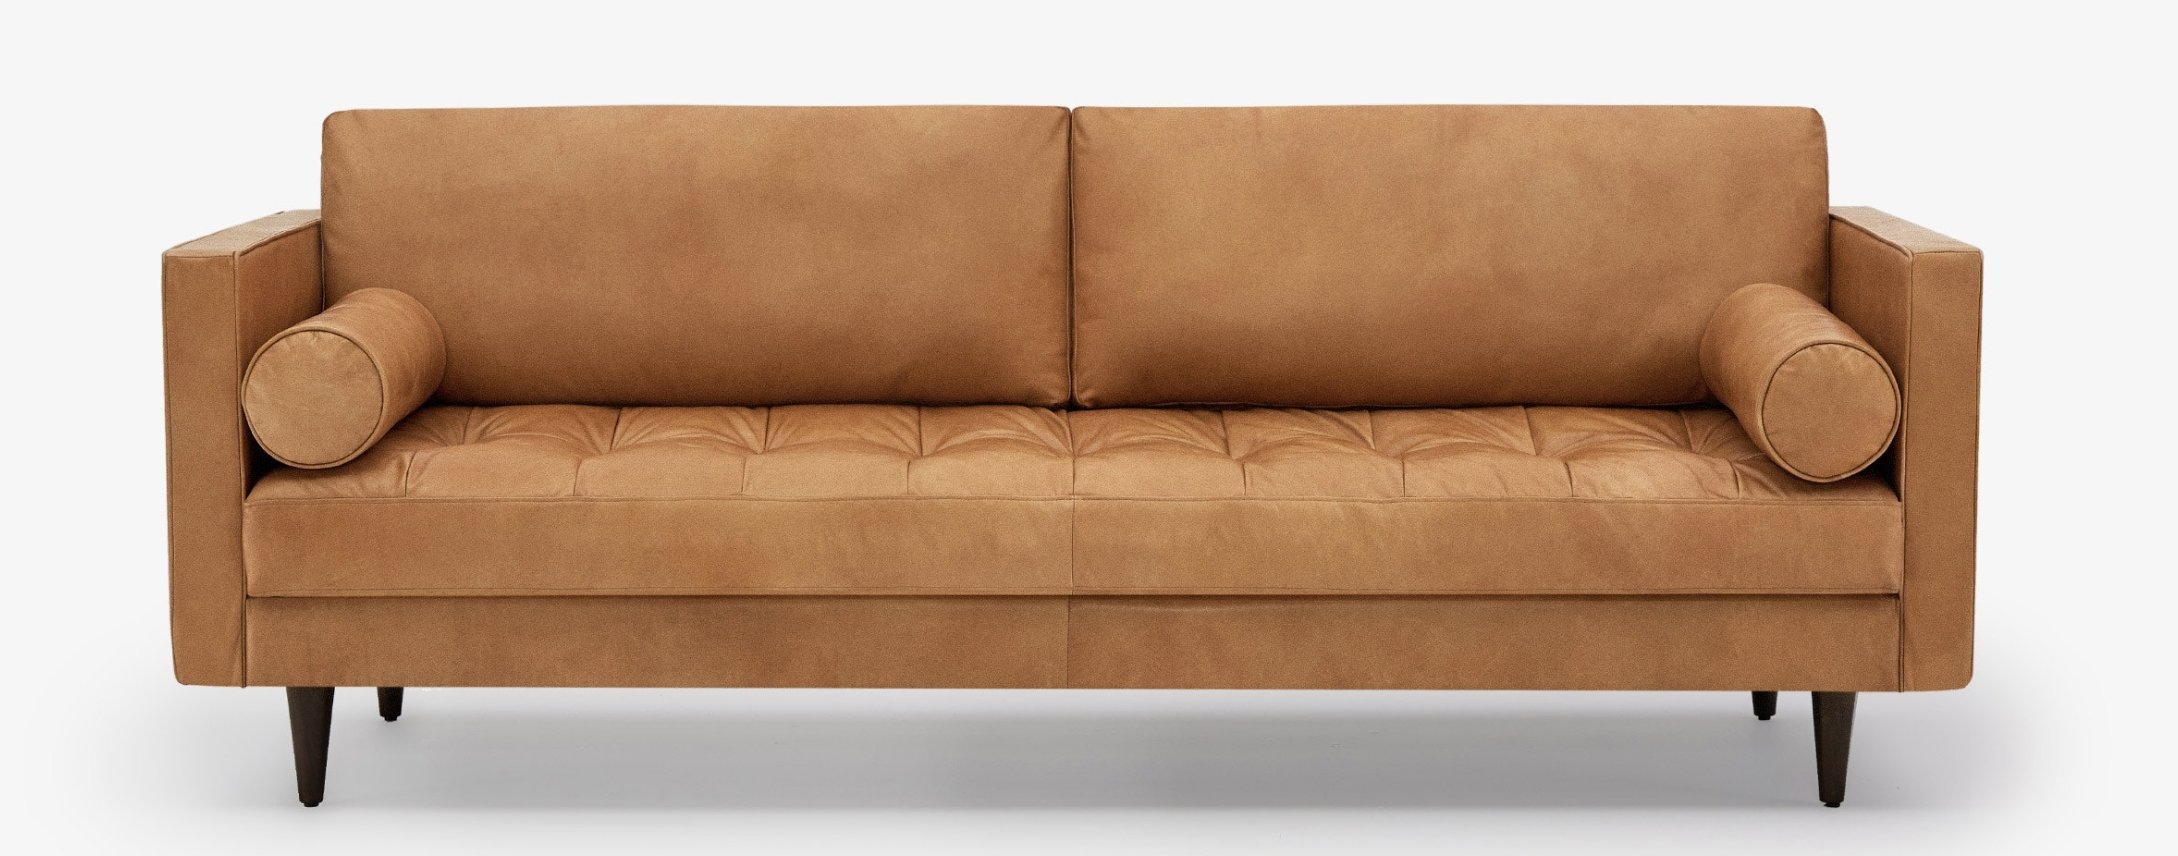 Briar Leather Sofa in Santiago Caramel Leather with Mocha Wood Stain - Image 0